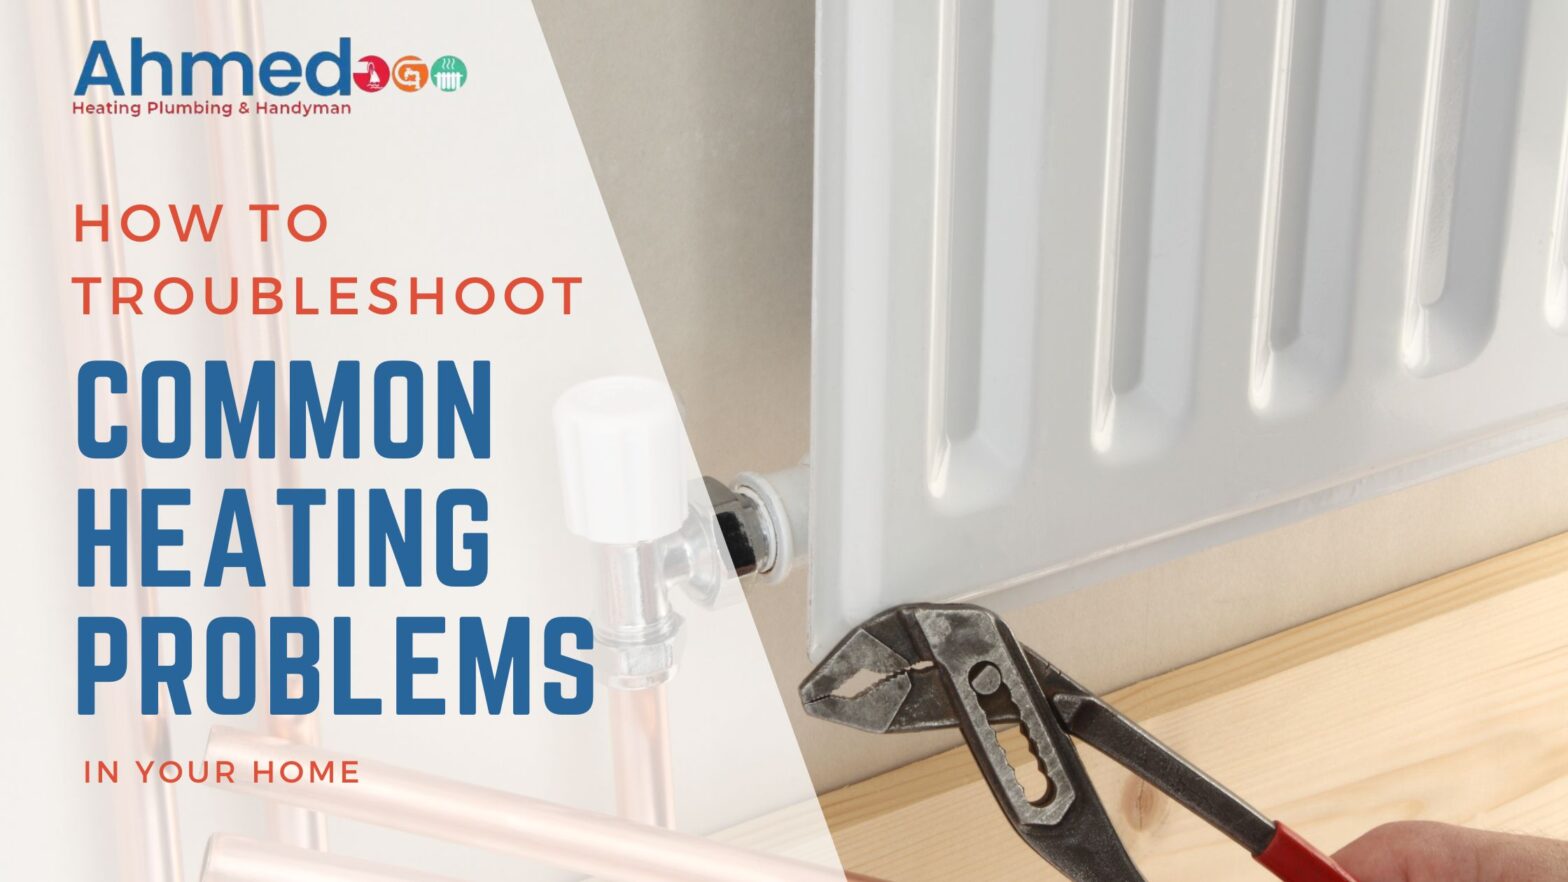 How to Troubleshoot Common Heating Problems in Your Home